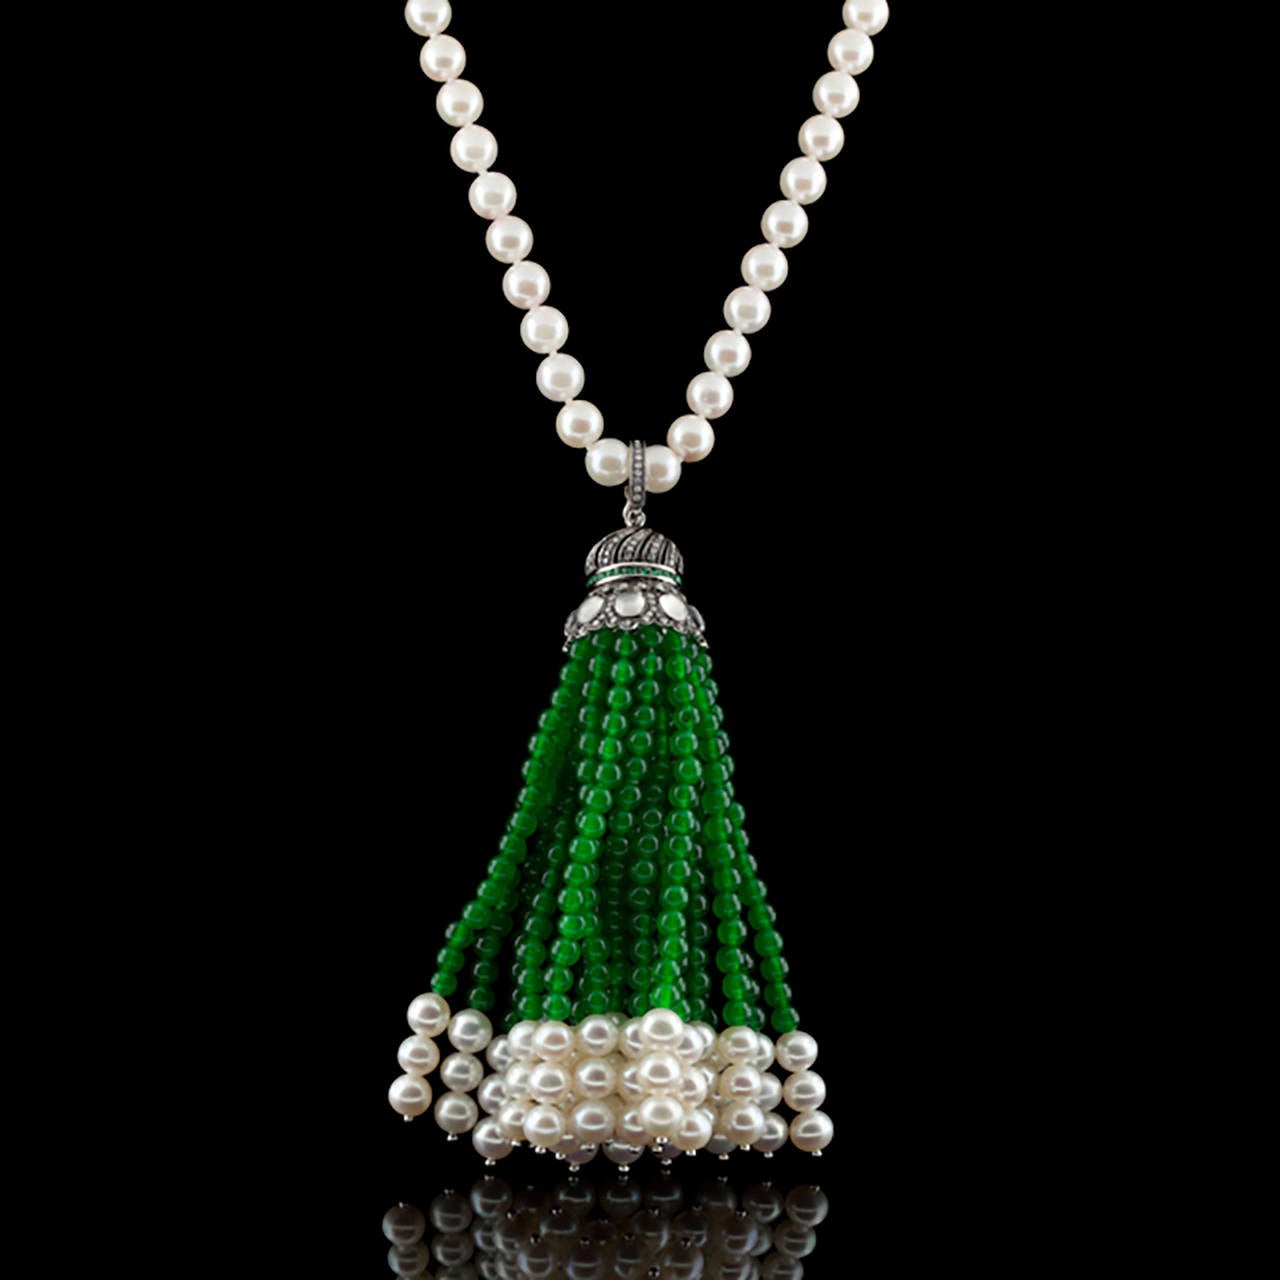 Sautoir 18Kt White Gold Necklace of Cultured Pearls, Moonstones, Green Colored Stones and Diamonds. The tassel suspends 4.25 inches from a 17 inch pearl necklace with 14Kt yellow gold clasp.